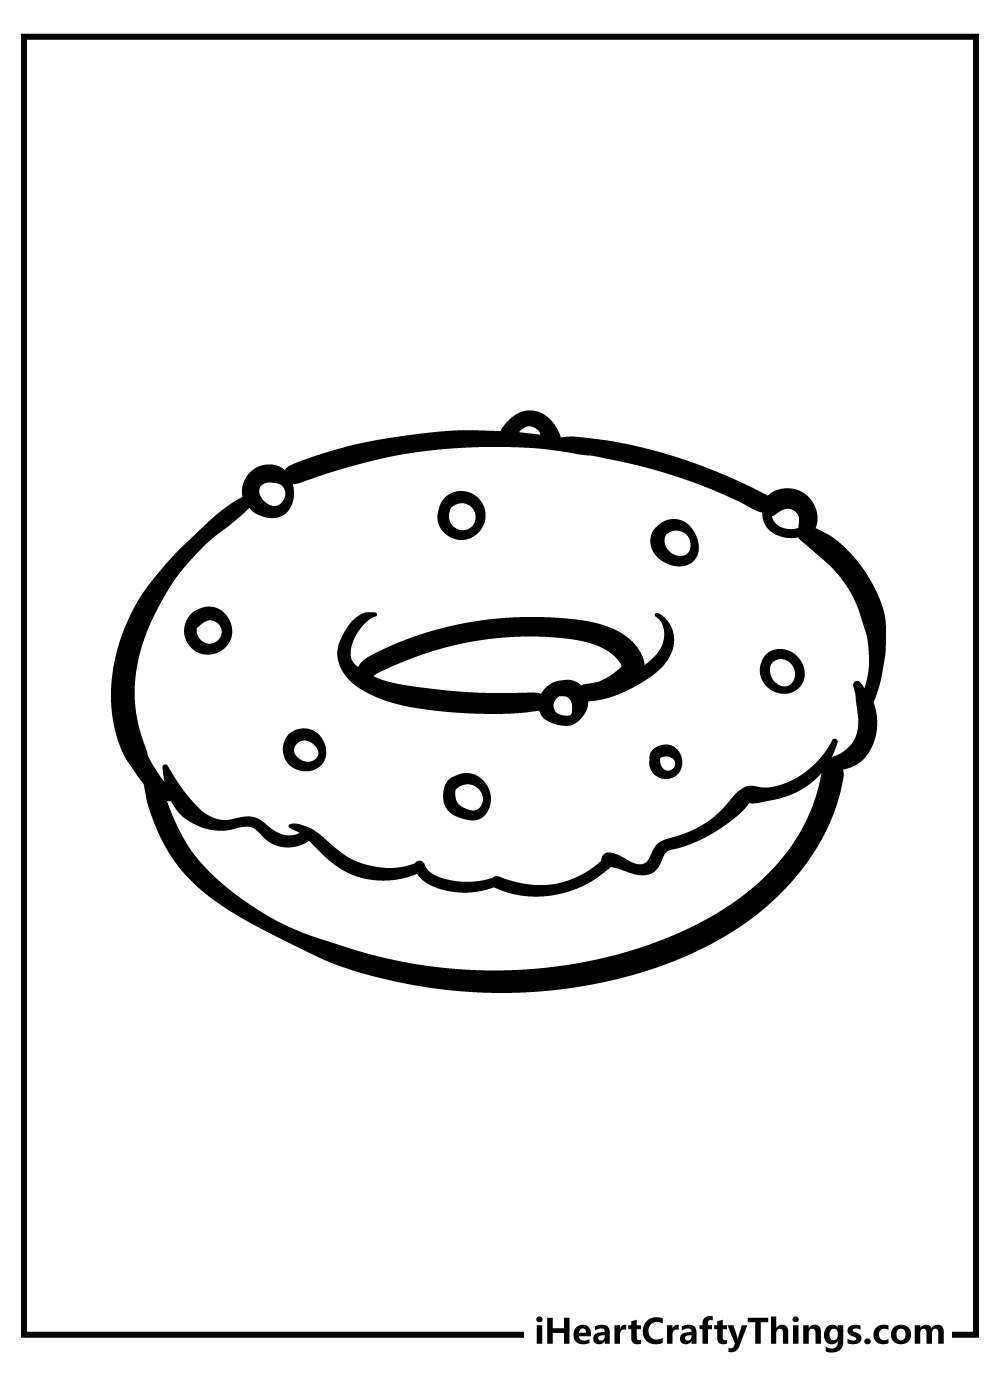 Donut coloring pages free printables